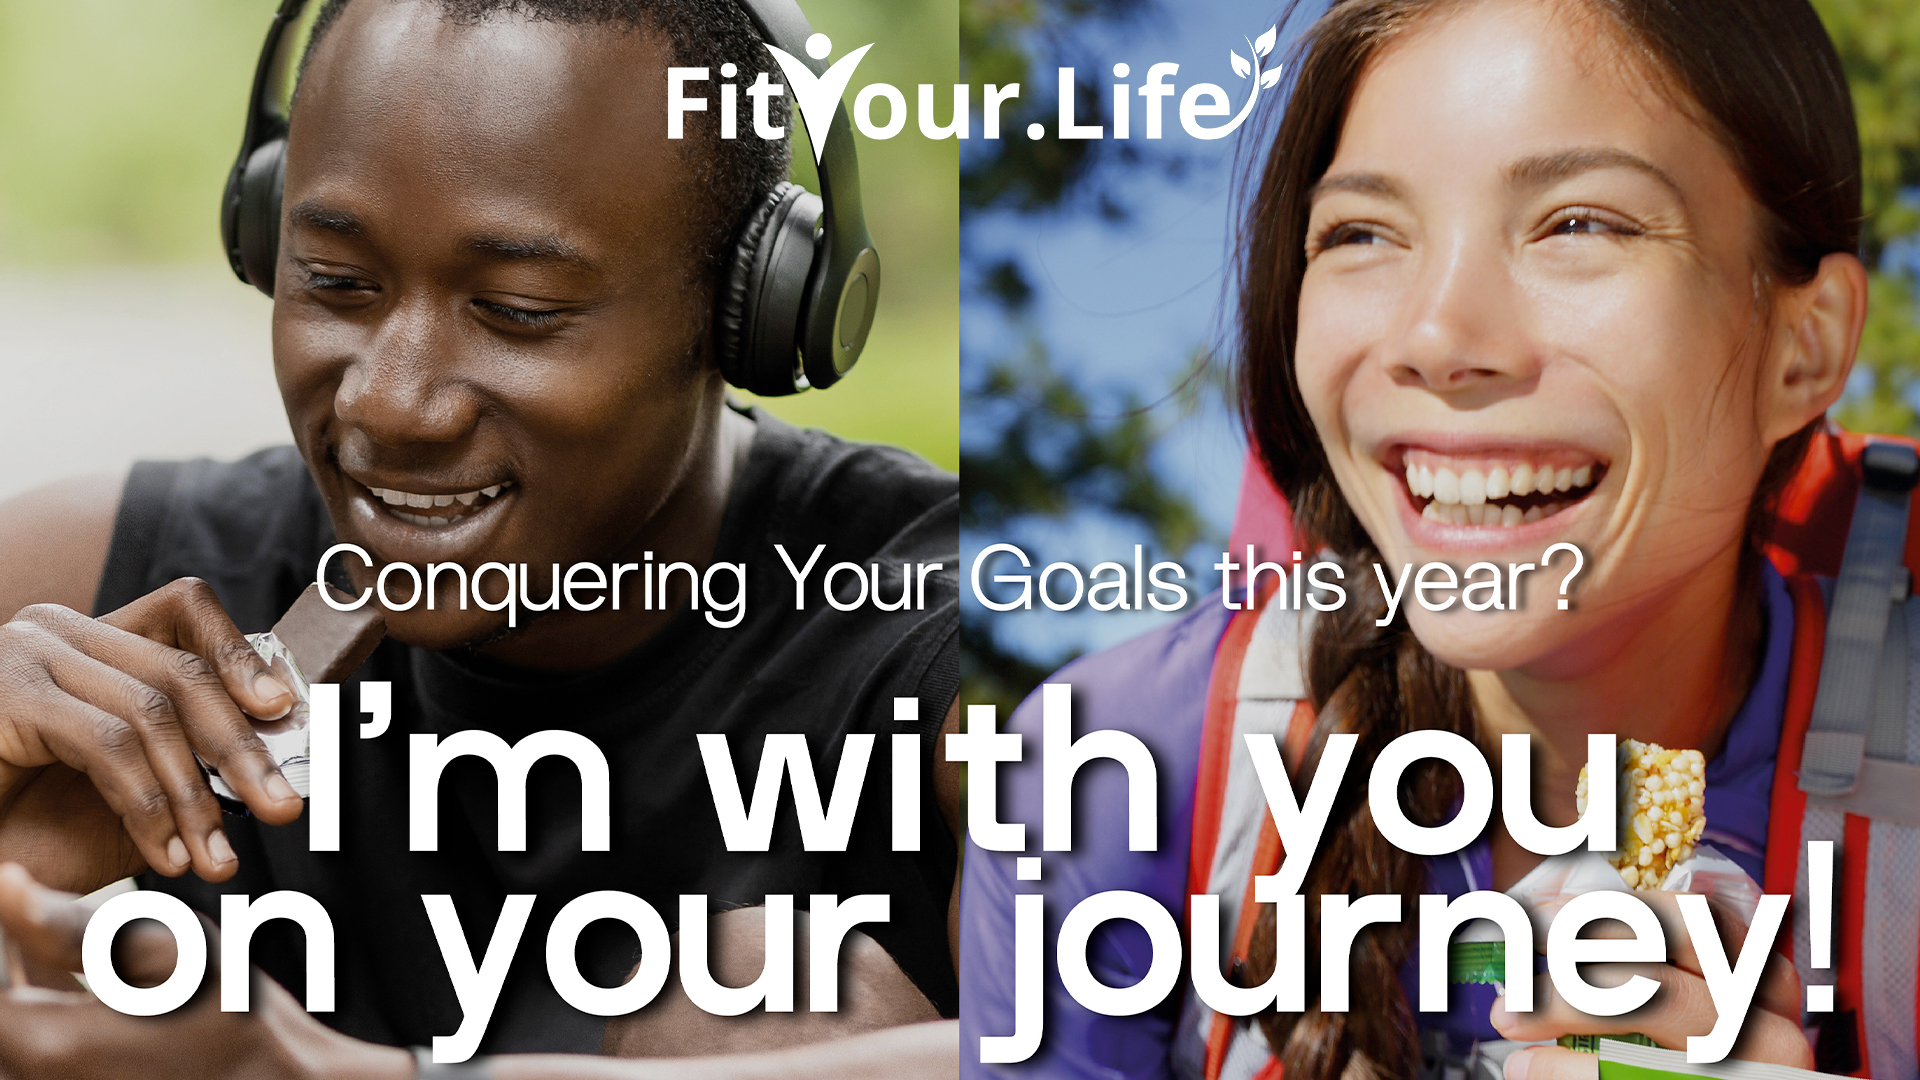 Online the New South Africa Web Store www.fityour.life  (FitYourLife)